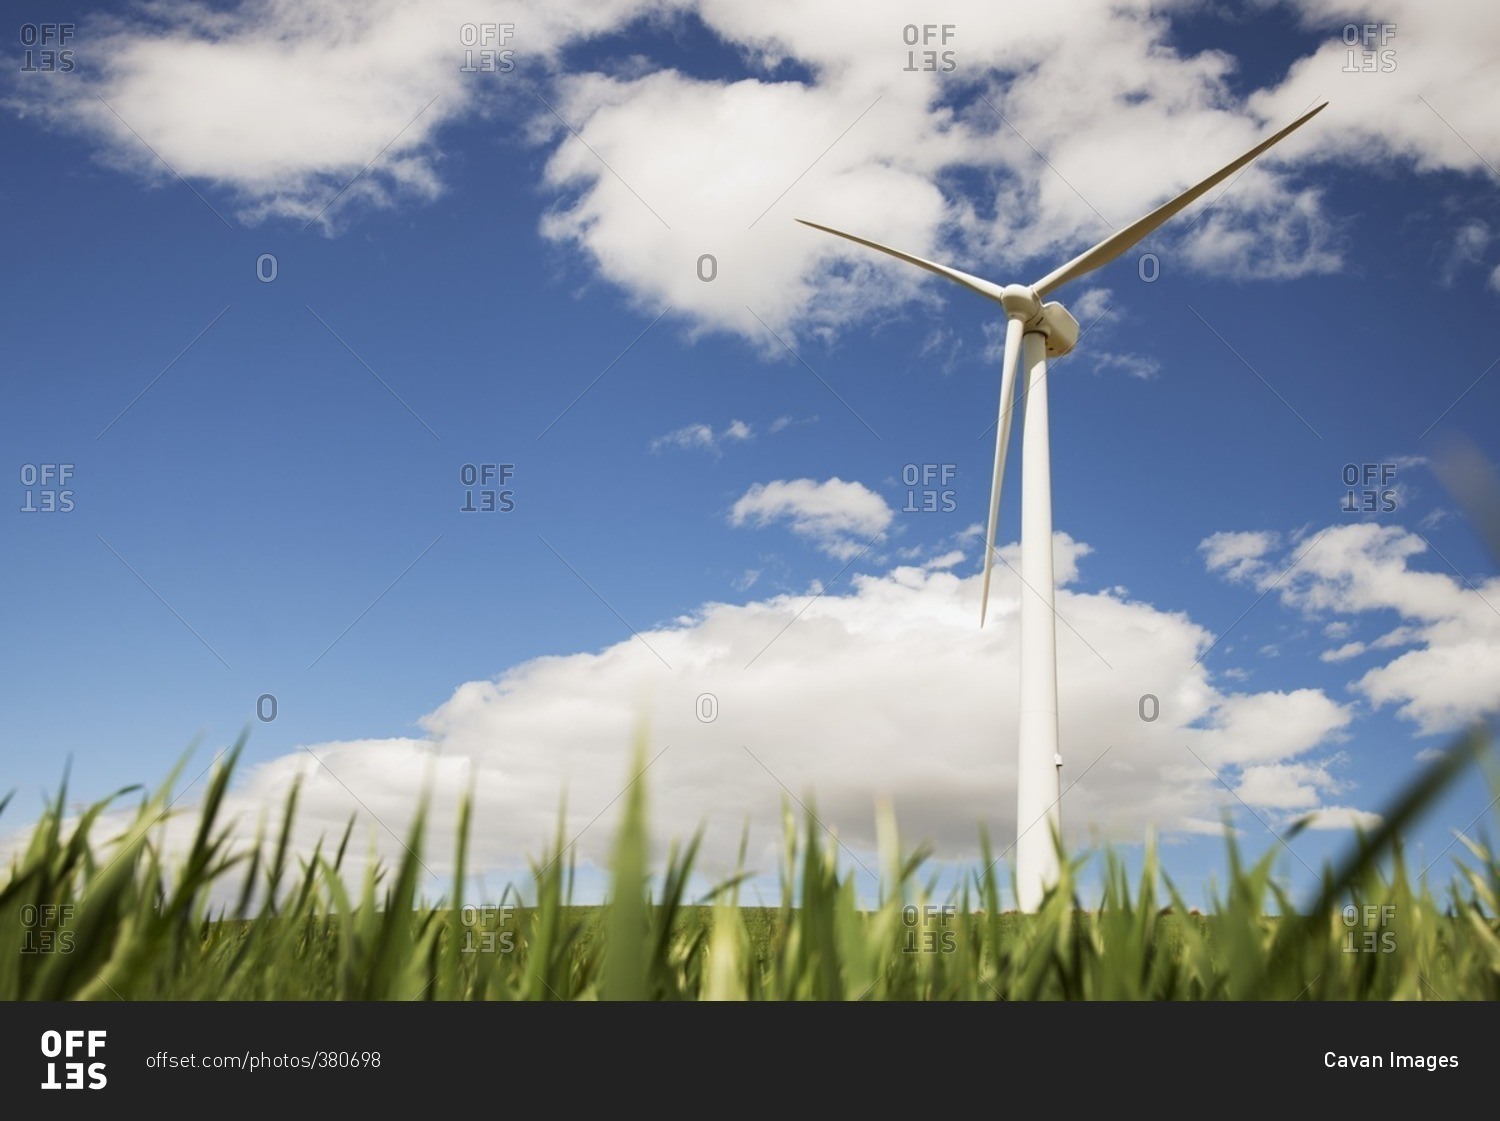 Low angle view of wind turbine on grassy field against sky